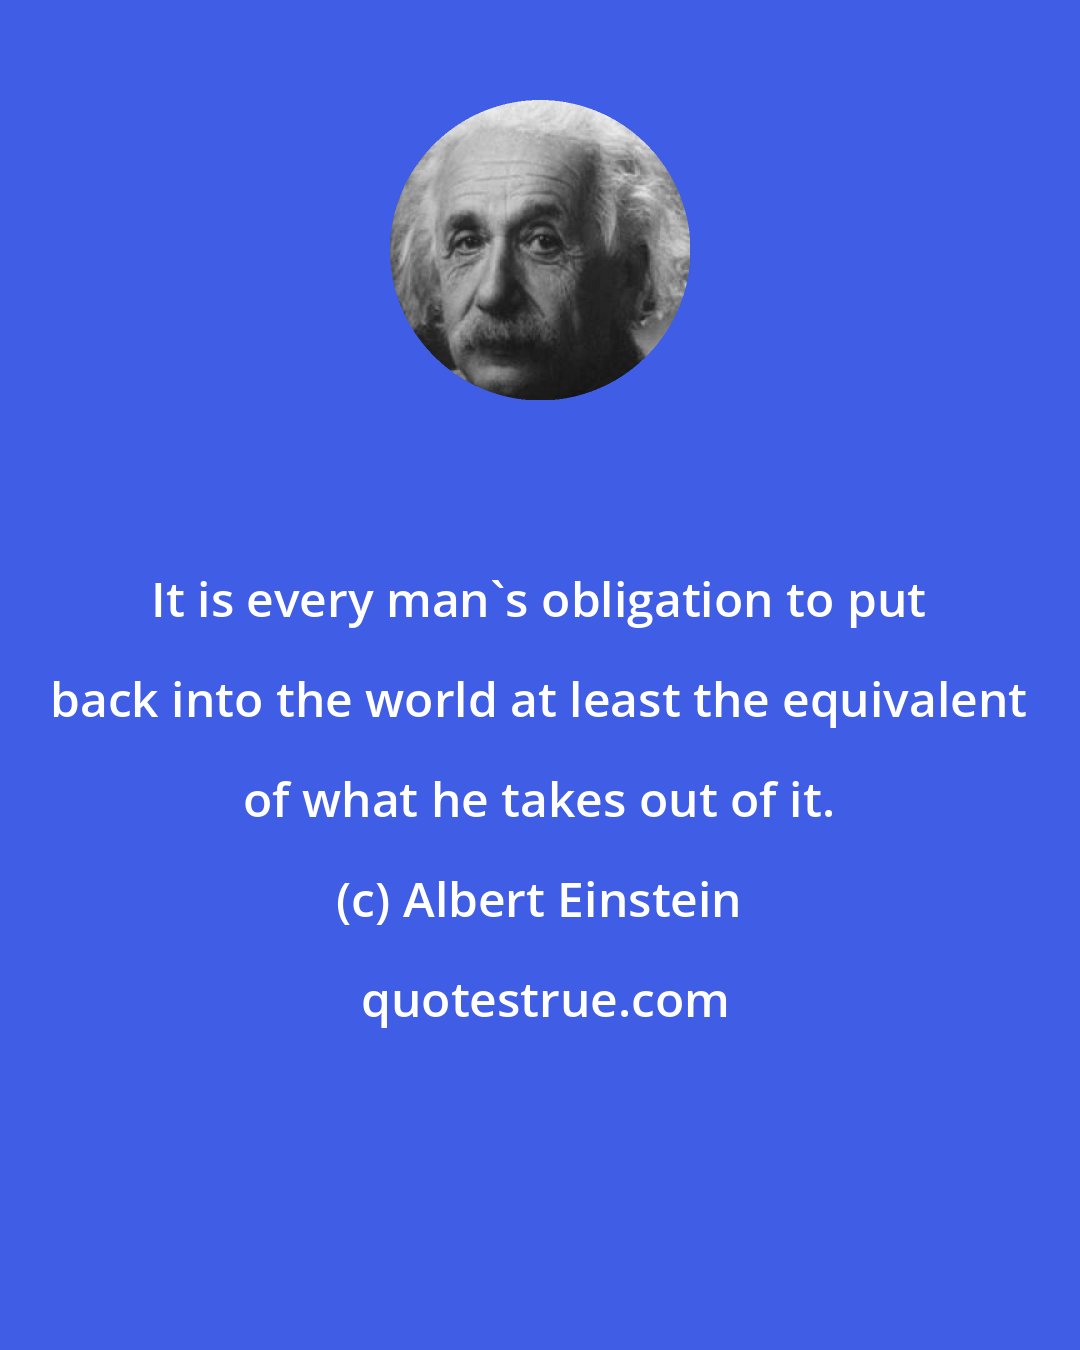 Albert Einstein: It is every man's obligation to put back into the world at least the equivalent of what he takes out of it.